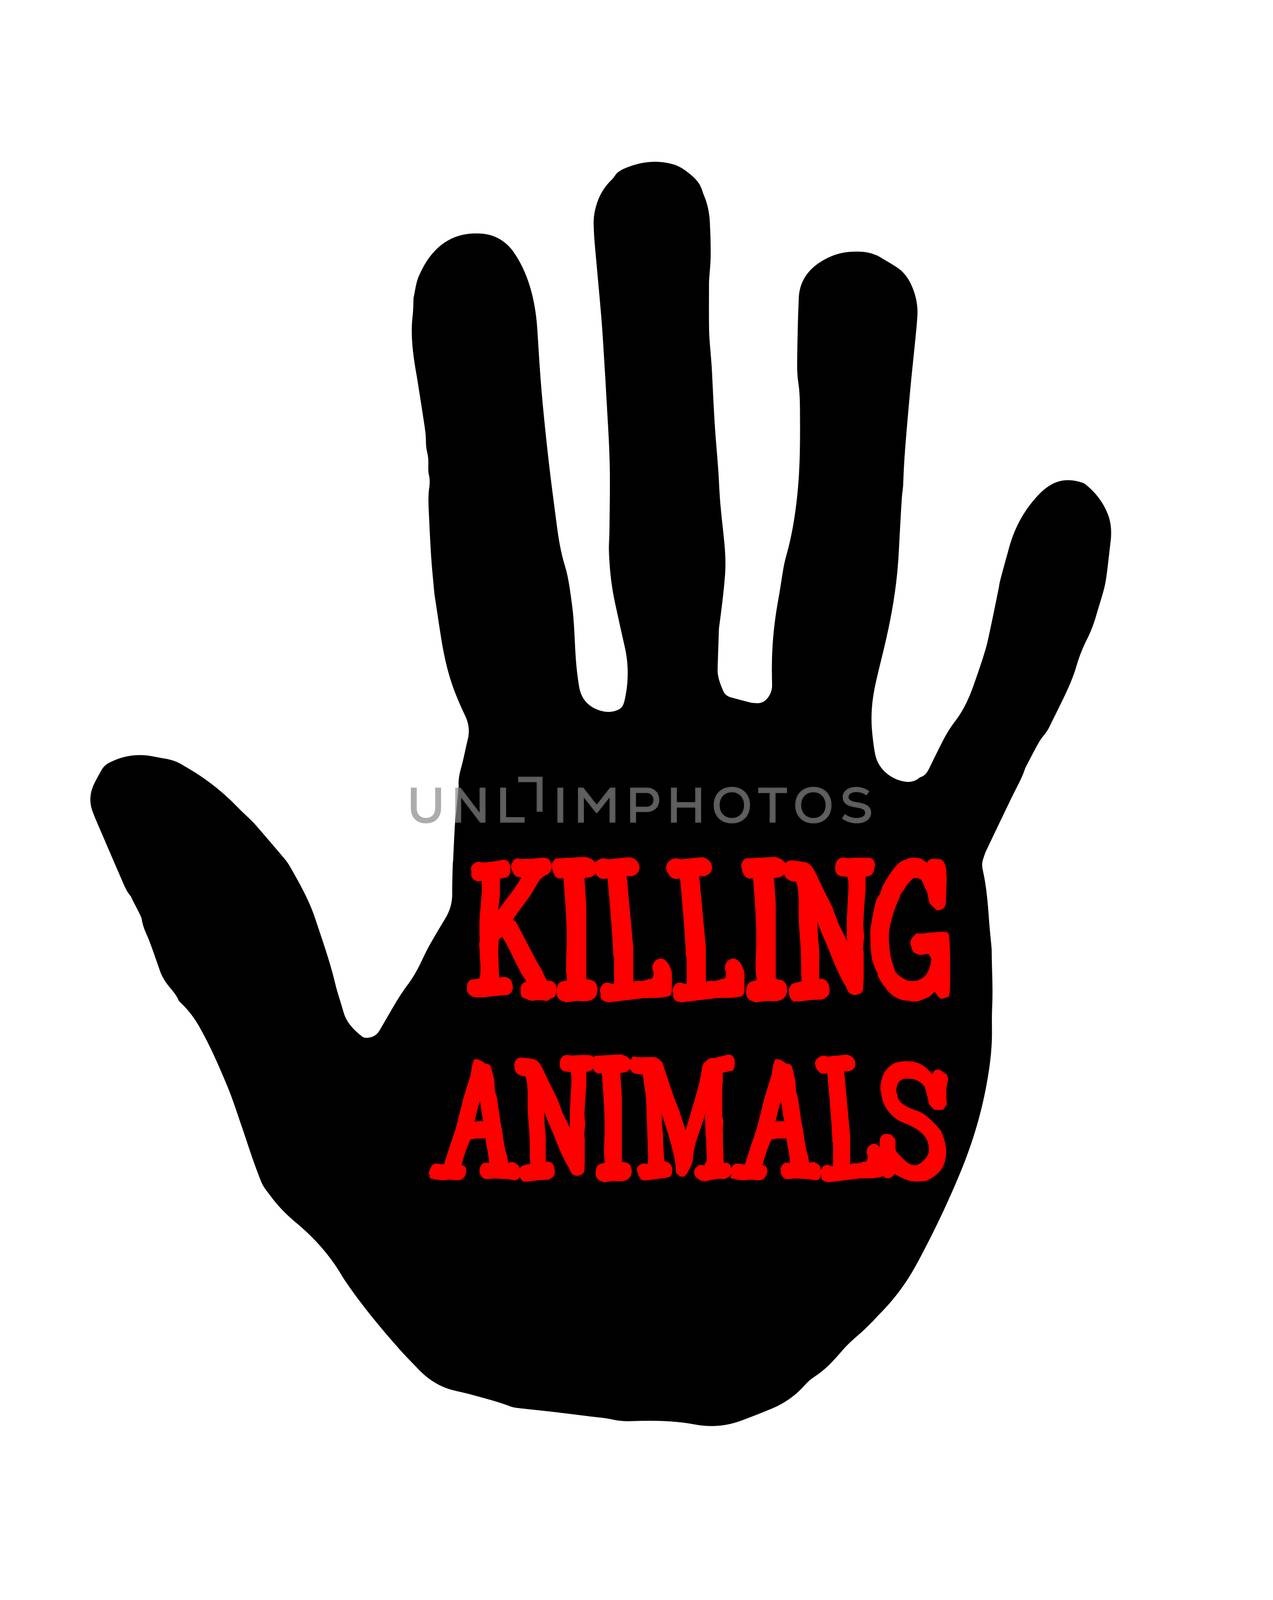 Man handprint isolated on white background showing stop killing animals